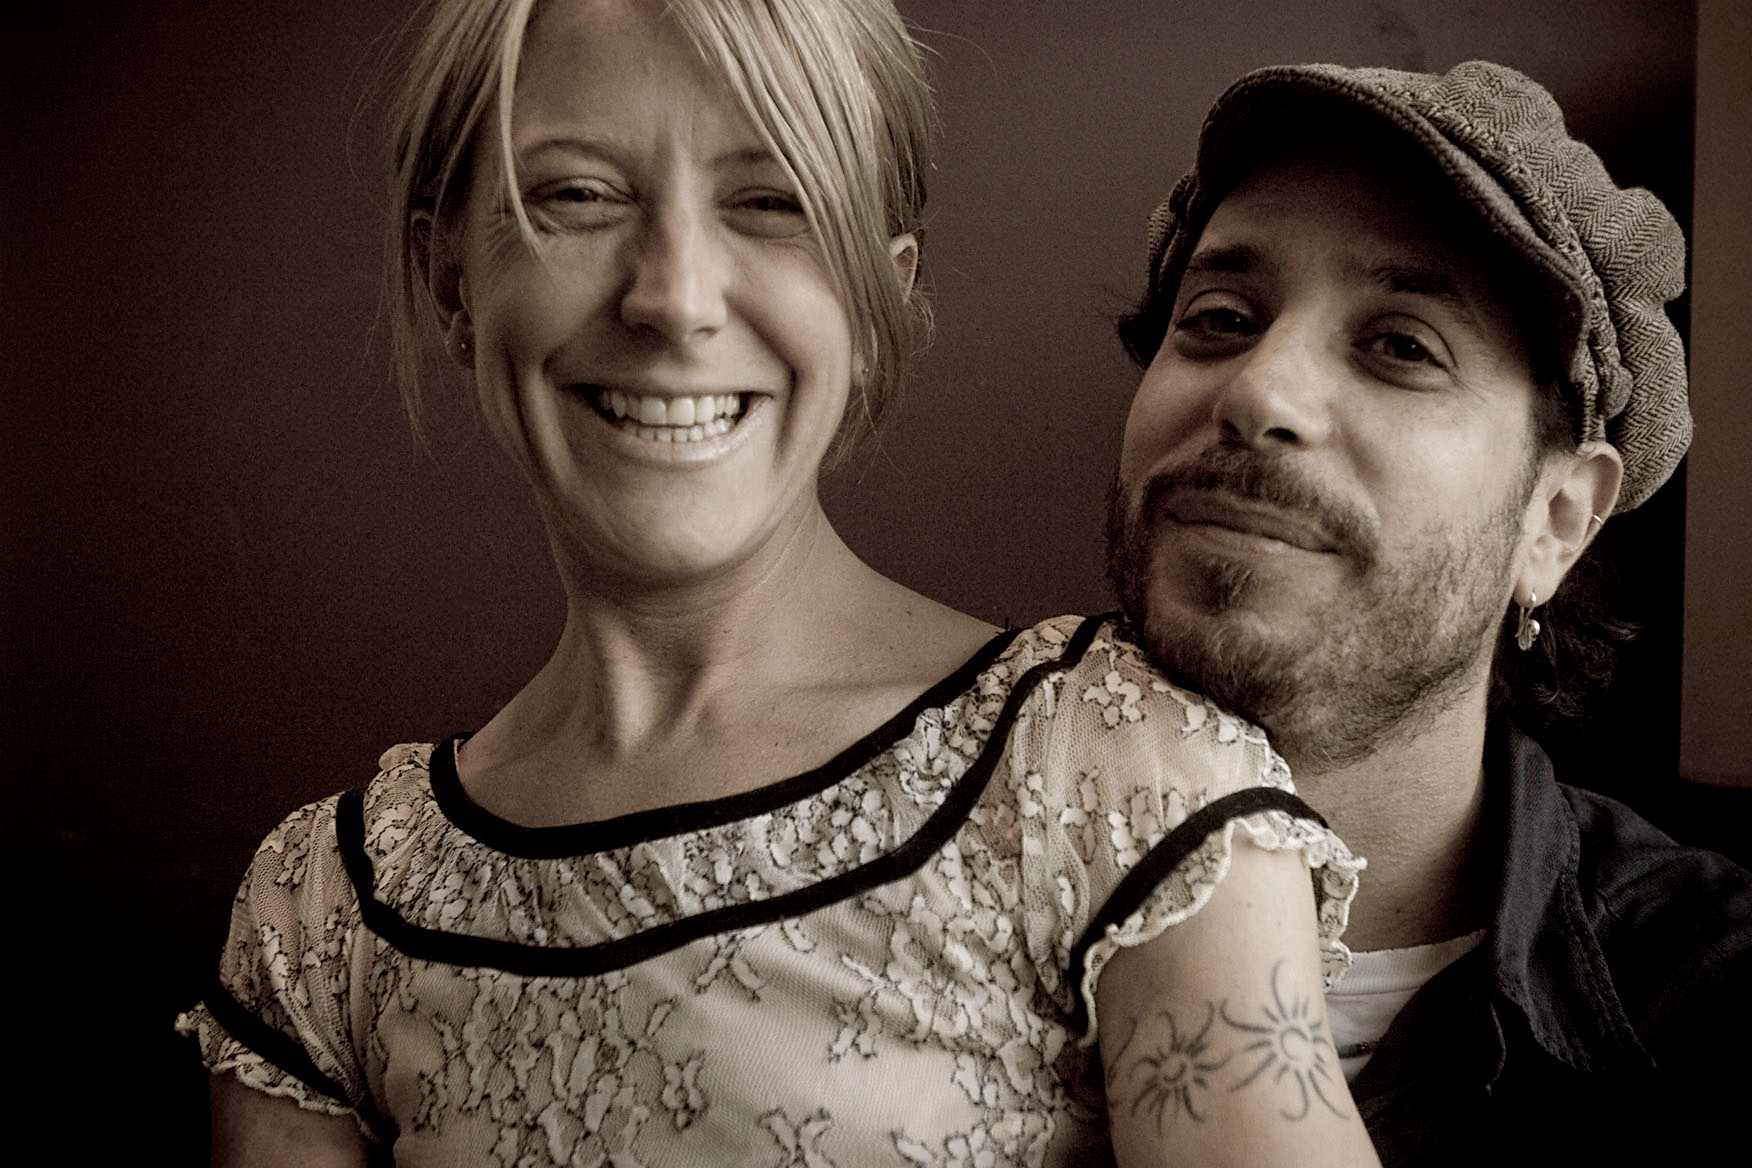 Song Premiere: Carrie Elkin & Danny Schmidt, “Two White Clouds” & “Echo In The Hills”